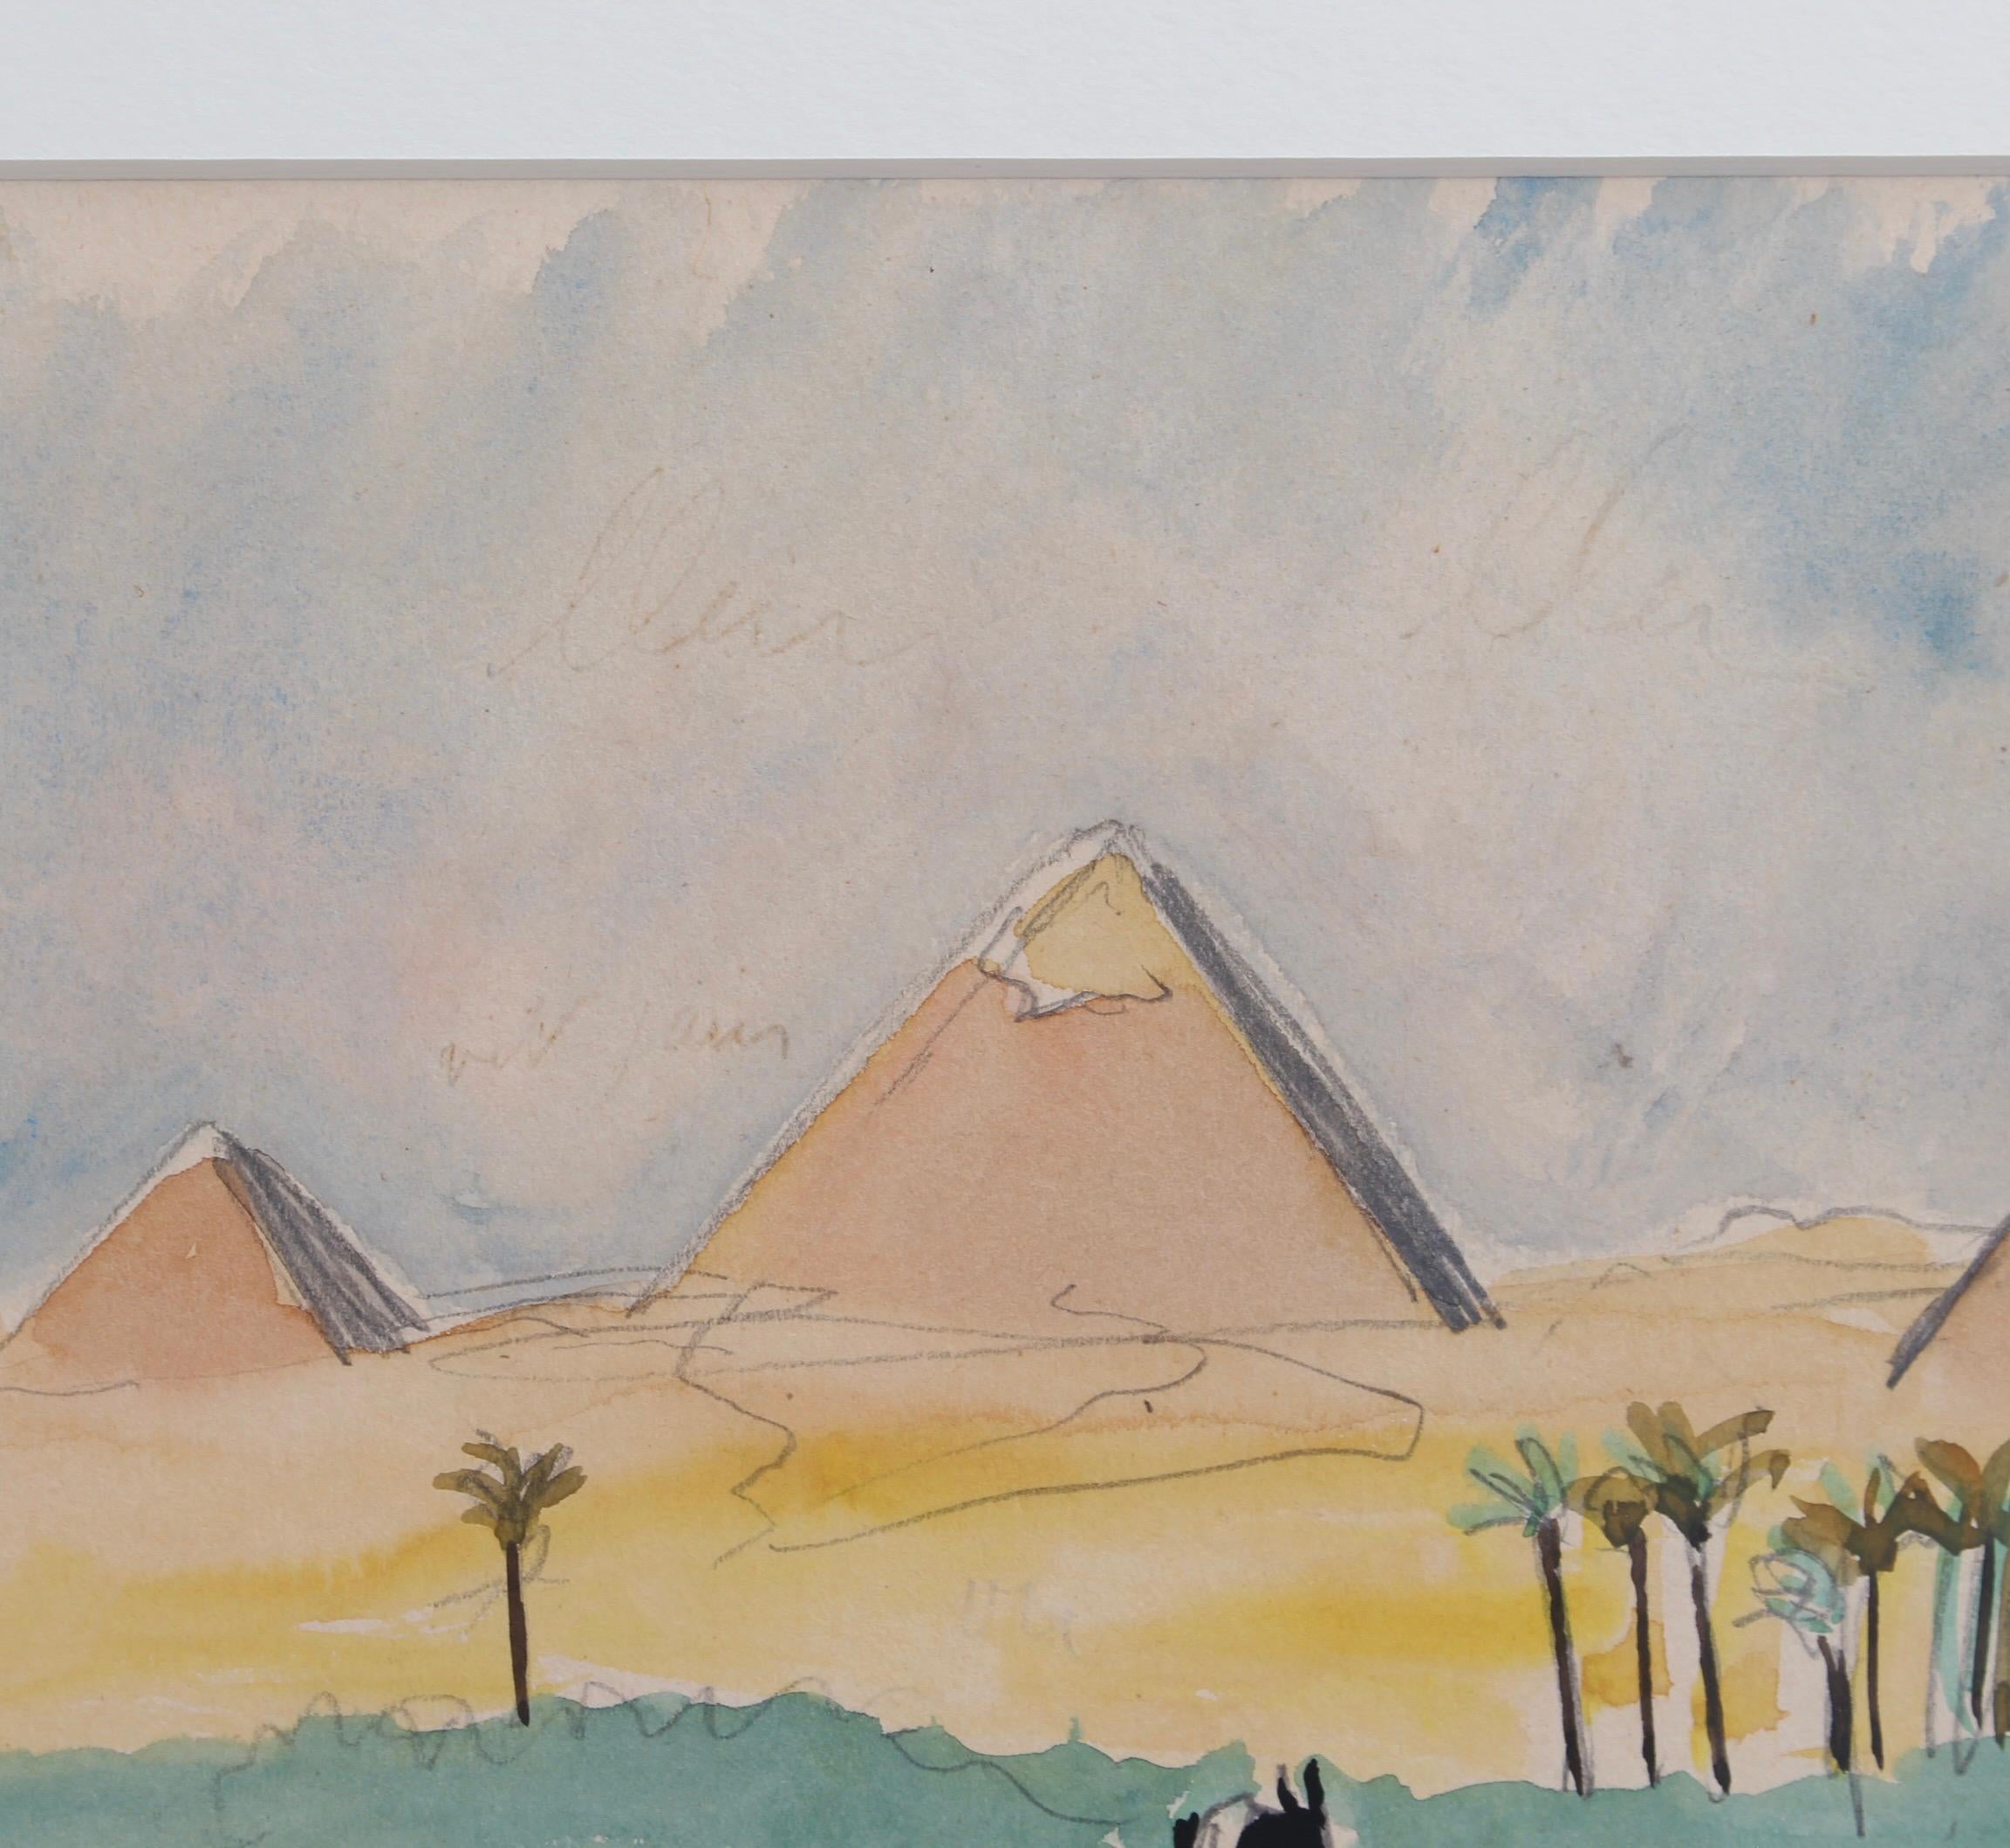 The Pyramids of Giza - Brown Figurative Art by Yves Brayer